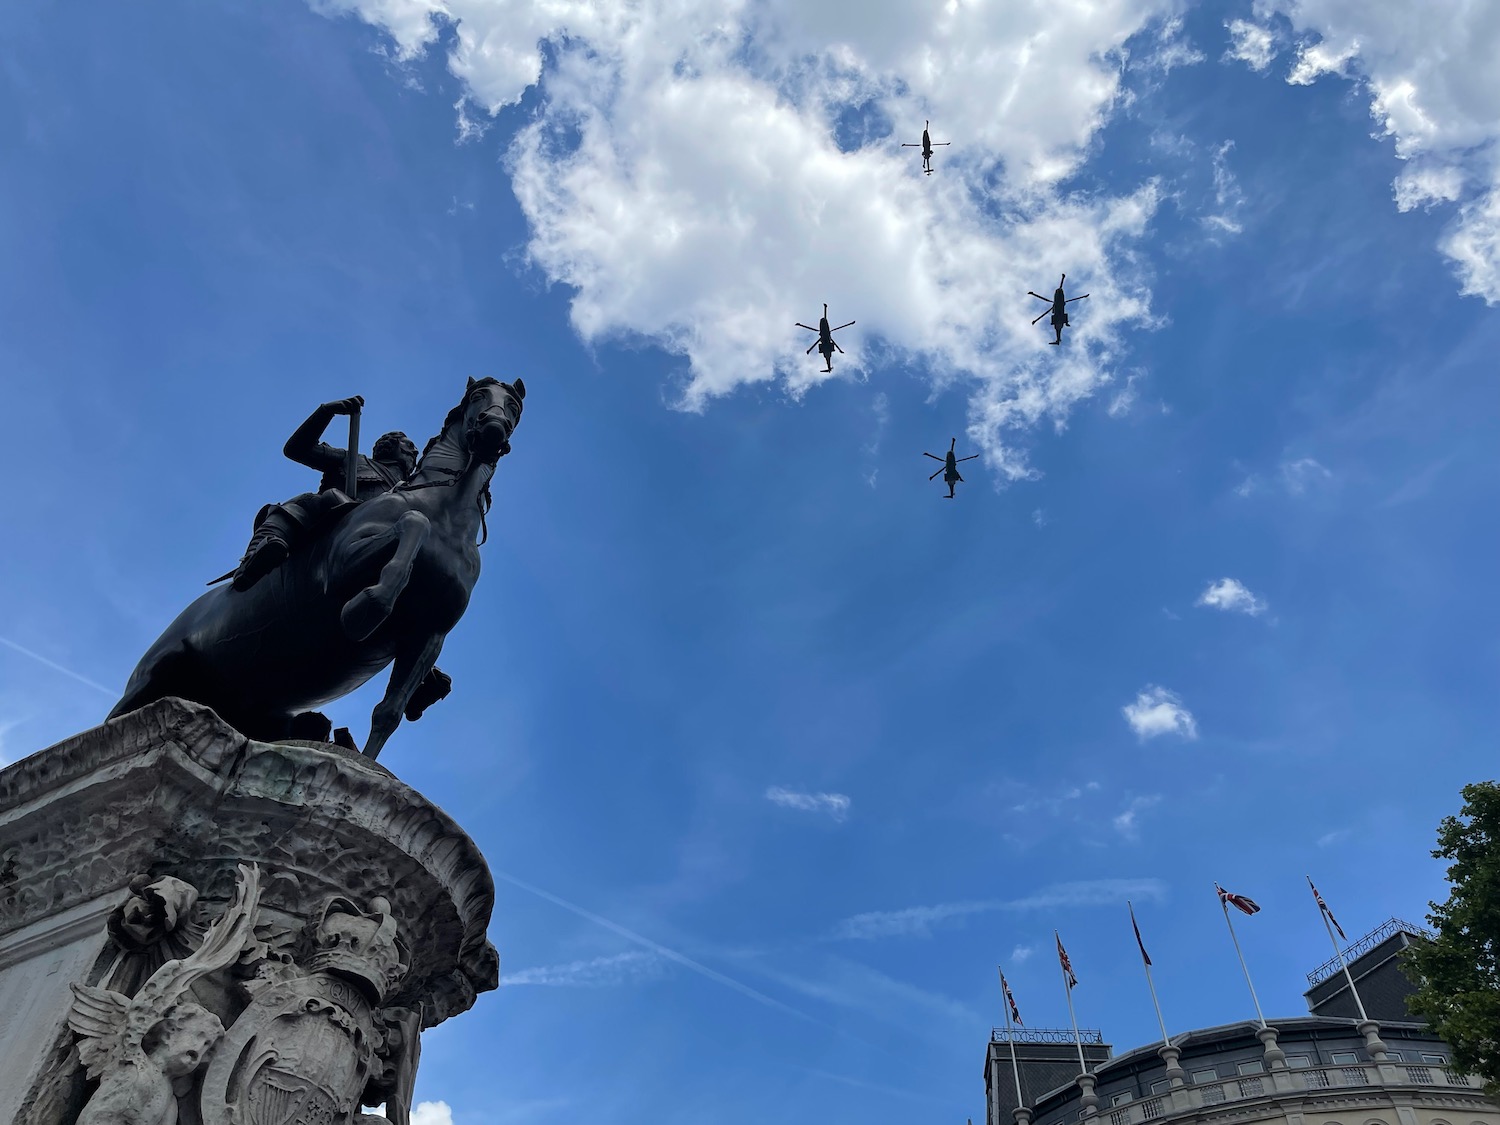 a group of airplanes flying over a statue of a horse